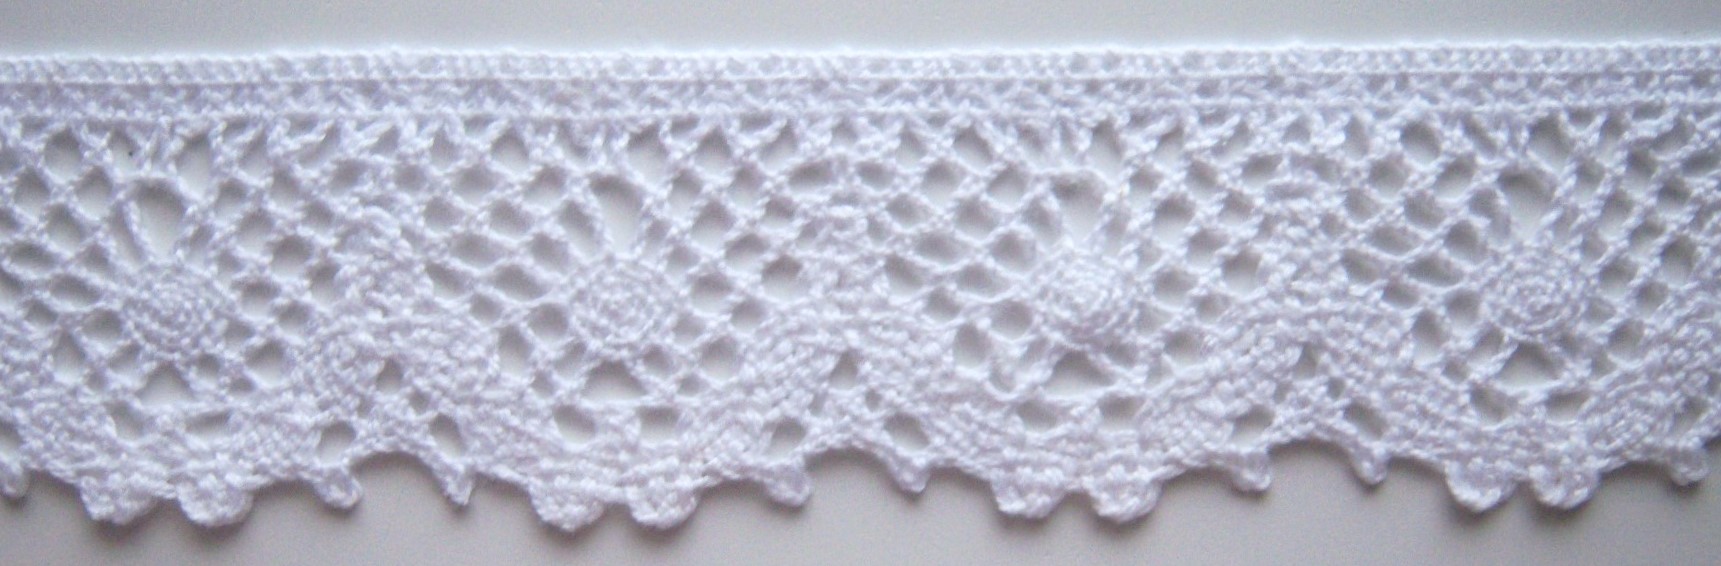 White 1 3/4" Cluny Lace